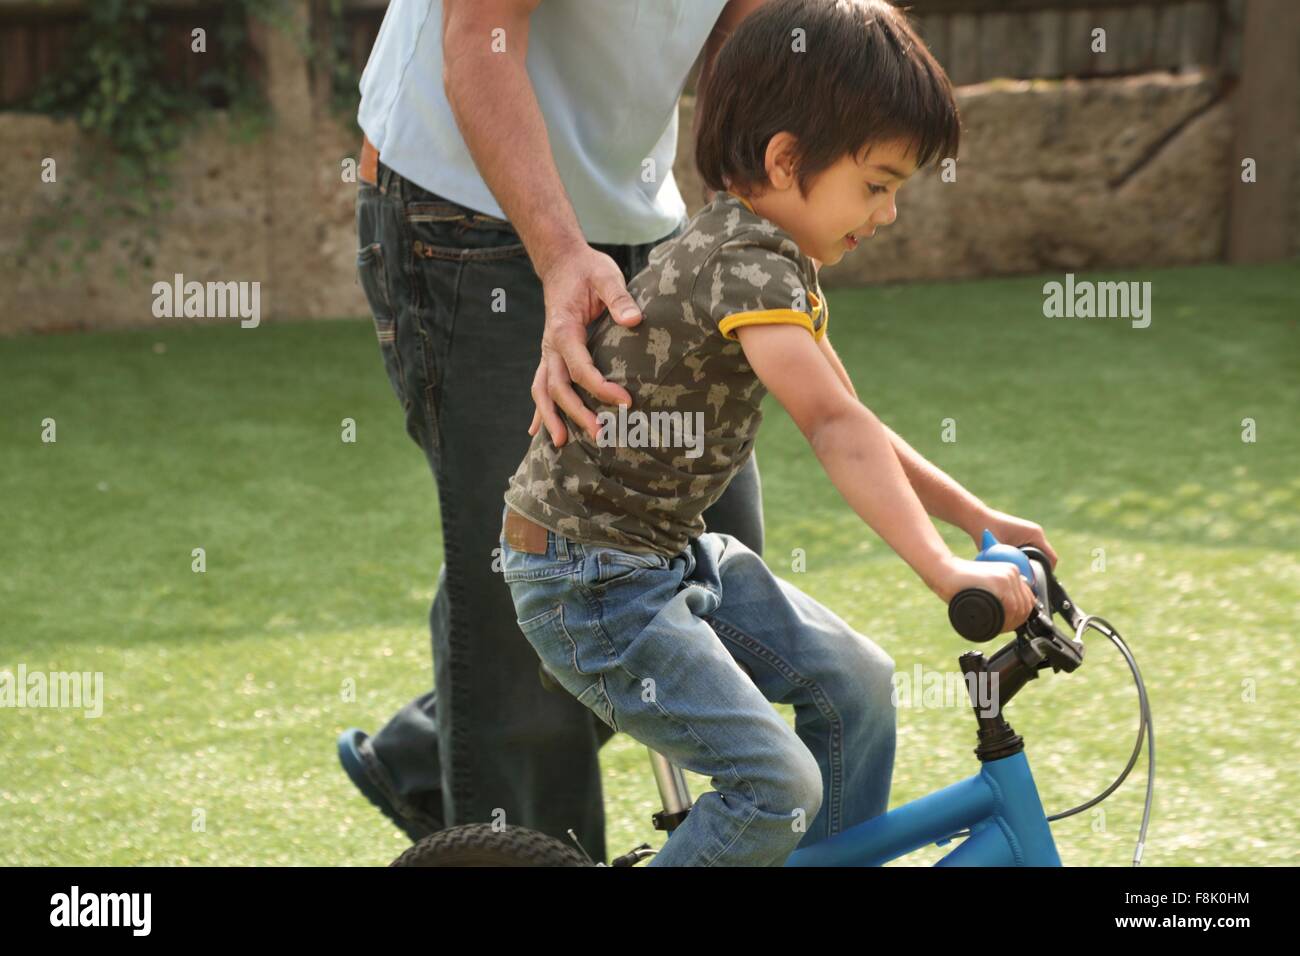 Side view of father supporting boy learning to ride bicycle Stock Photo